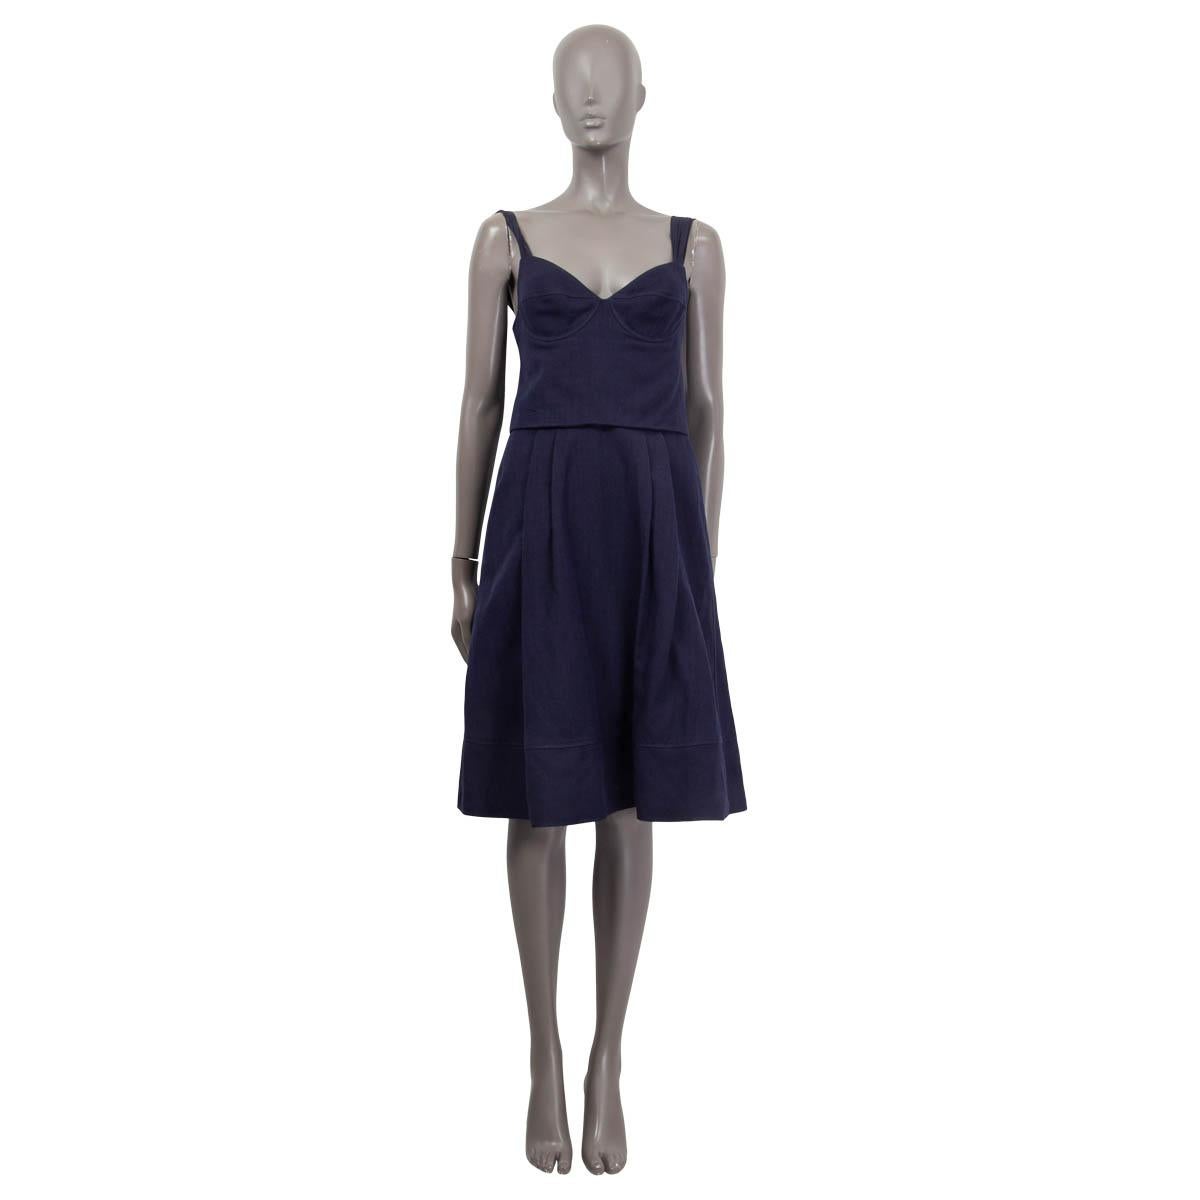 100% authentic Louis Vuitton paneled bustier dress in navy blue linen (50%) and silk (50%). Features an a-line fit and chiffon silk straps. Corsage lined in blue silk (100%) and the skirt lined in white linen (87%) and silk (13%). Has been worn and